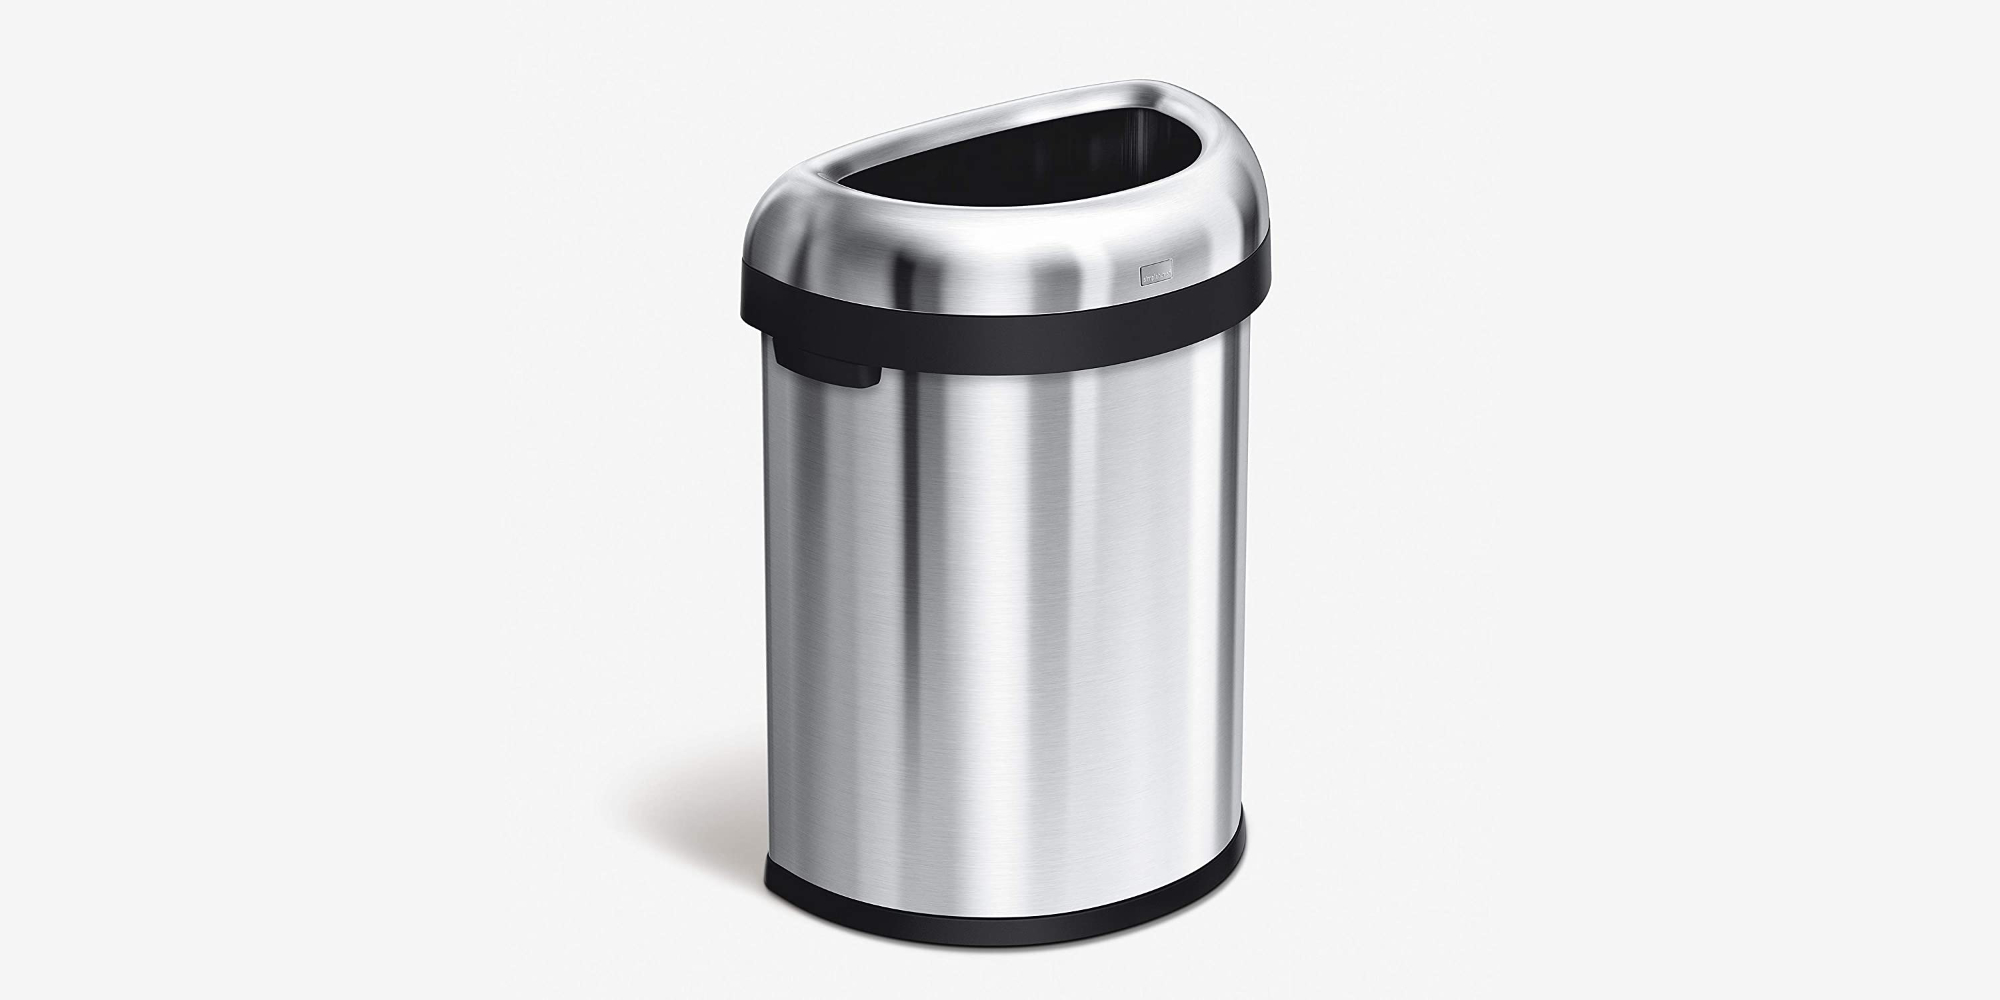 https://9to5toys.com/wp-content/uploads/sites/5/2021/01/simplehuman-21.1-Gallon-Stainless-Steel-Trash-Can.jpg